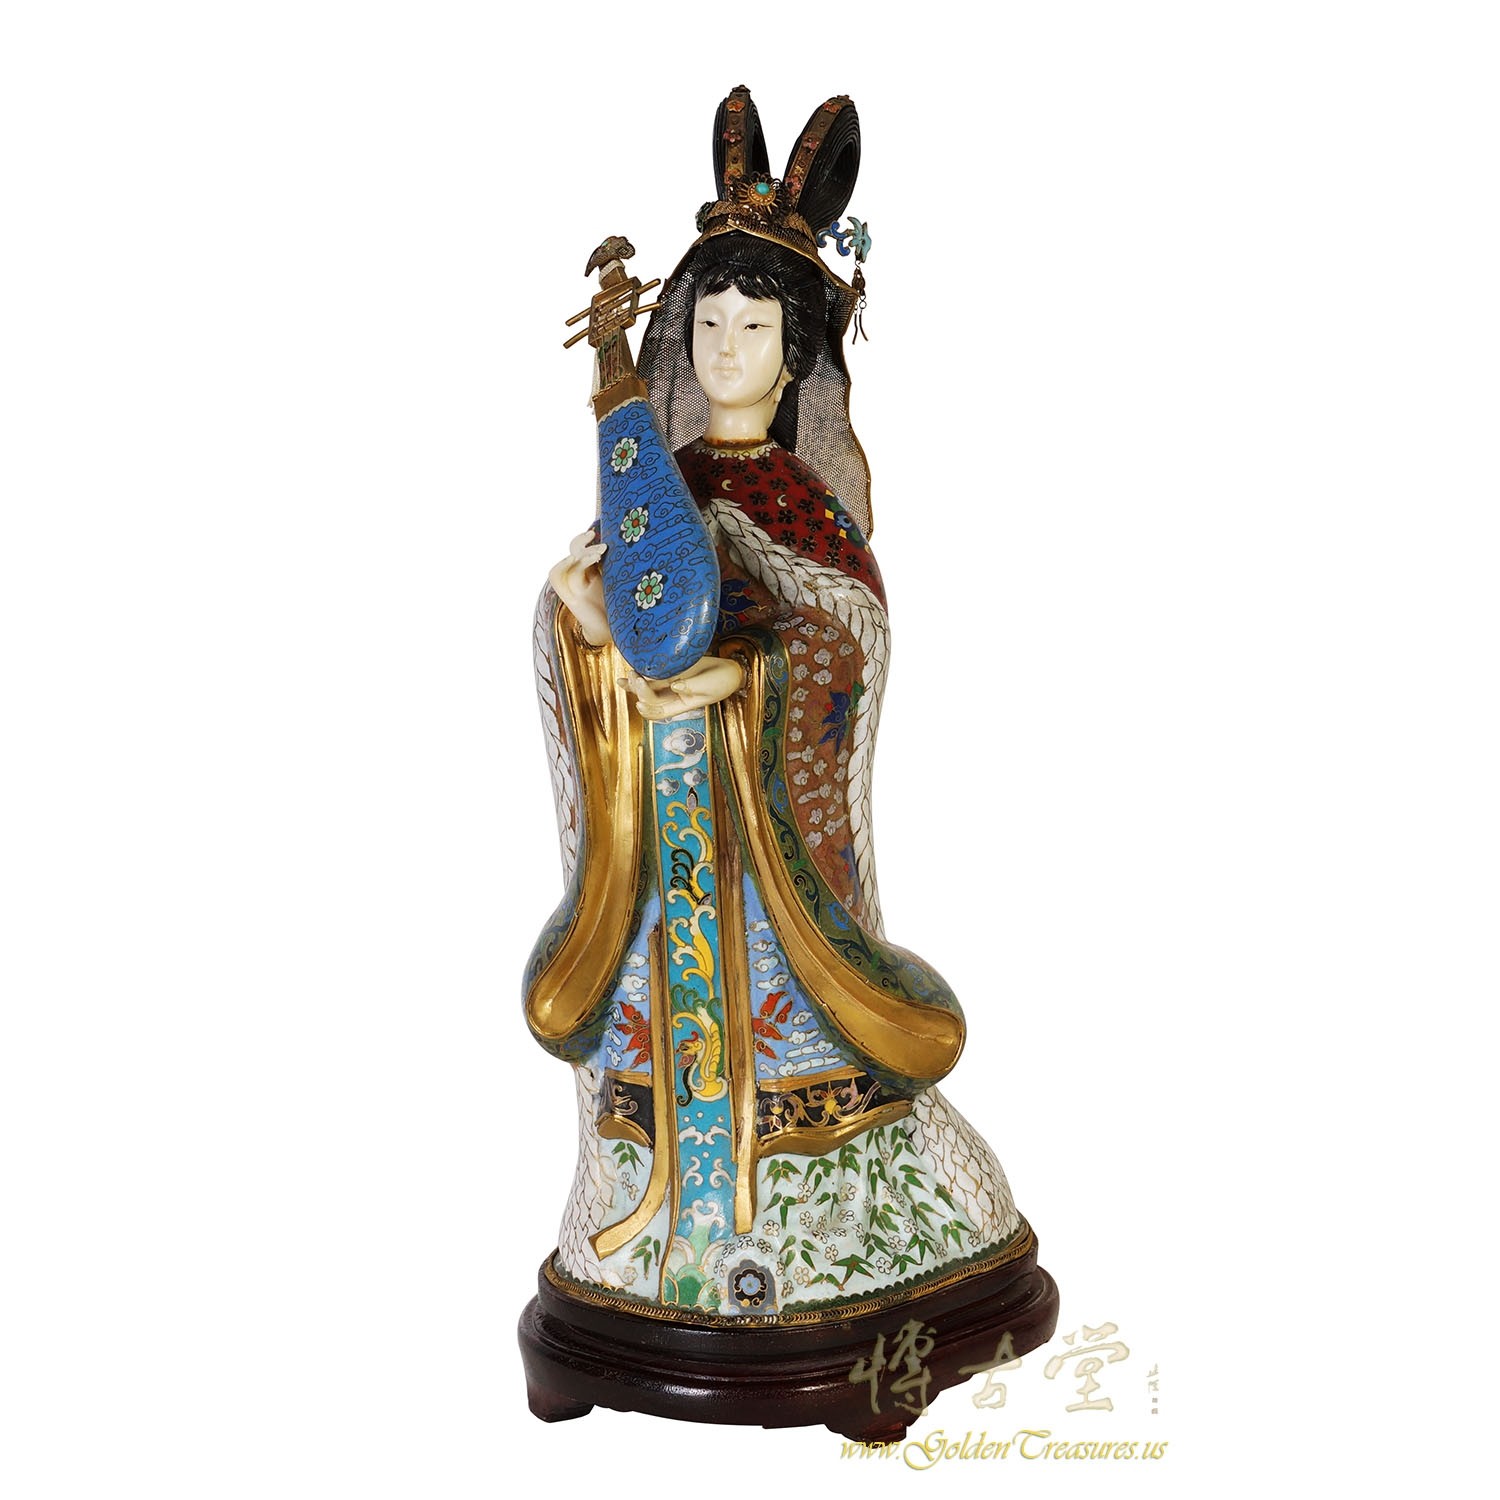 Chinese Antique Cloisonne Beauty Figurine With Musical instrument